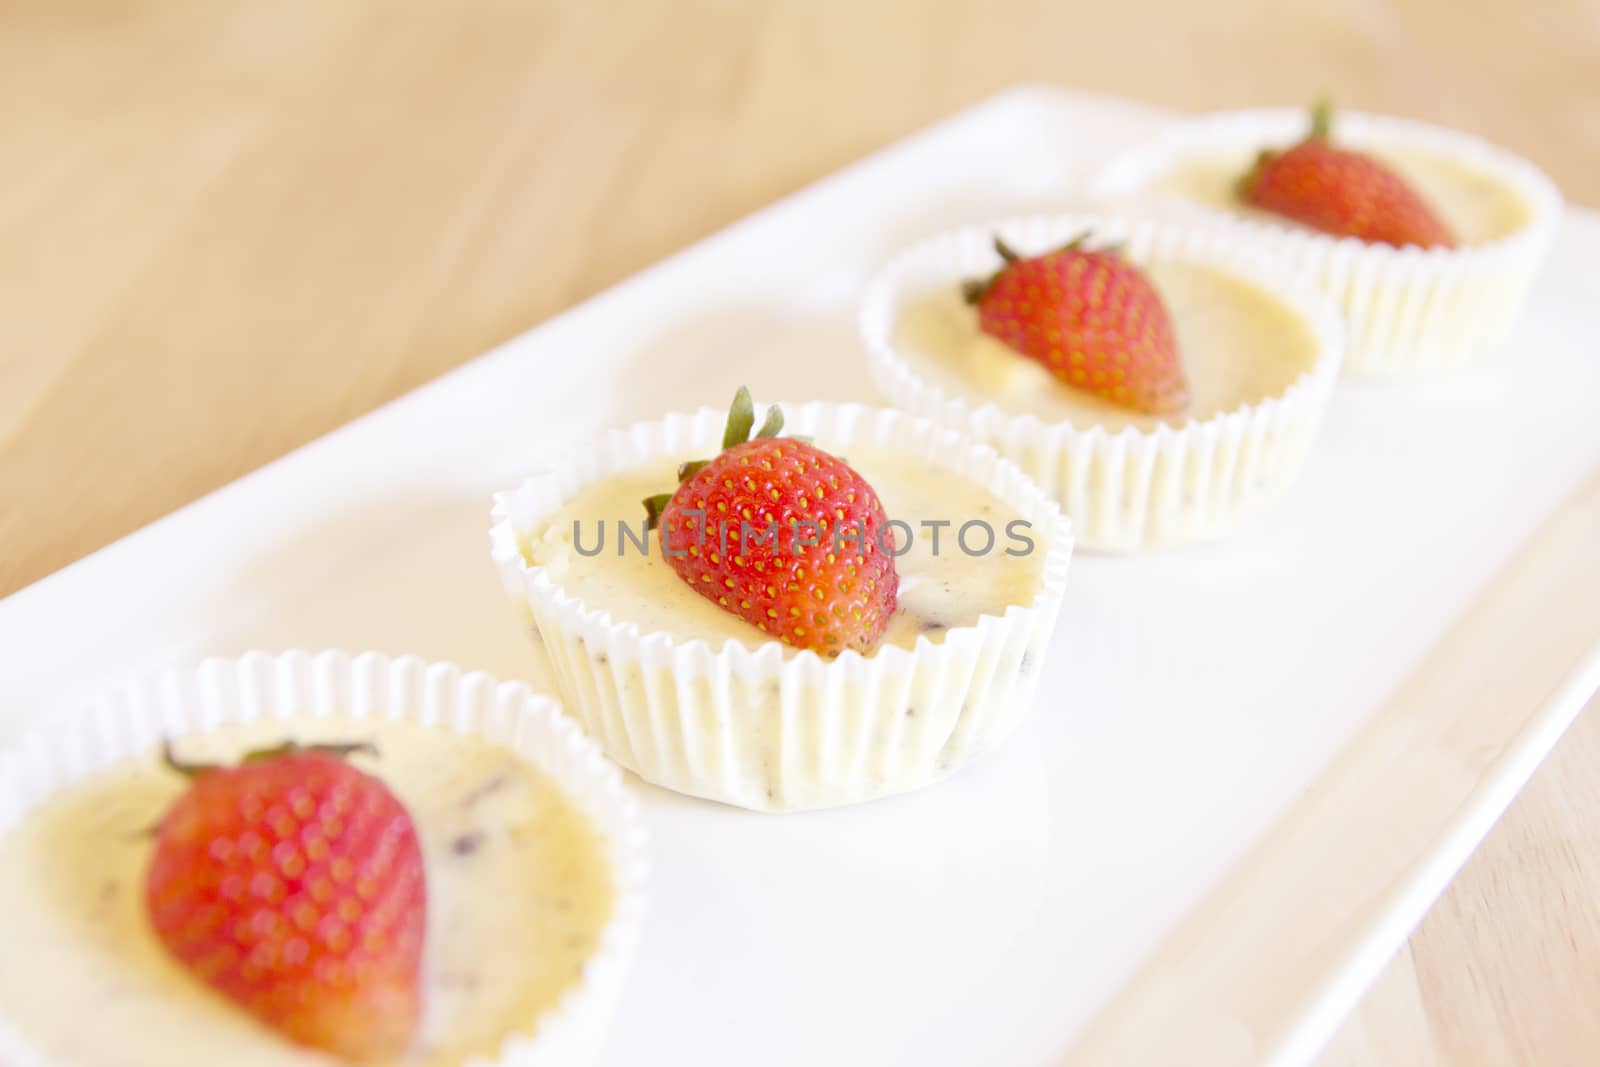 Chese Cake with Strawberry on top by wyoosumran